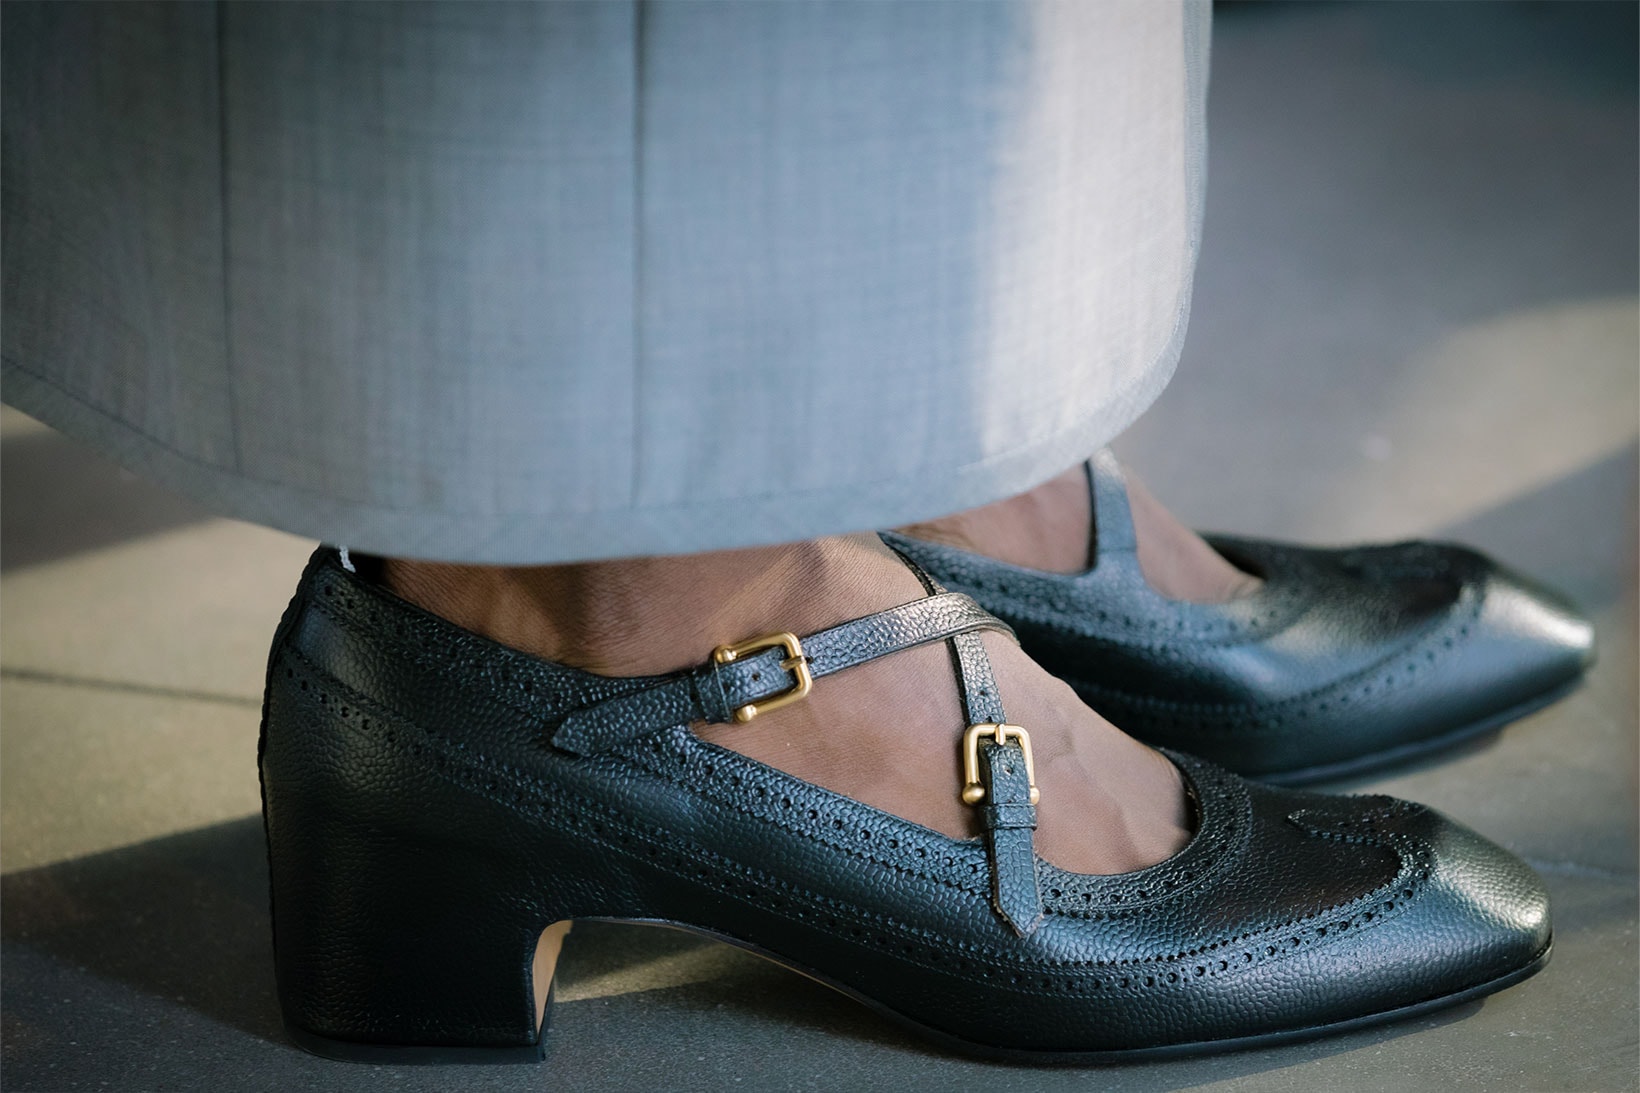 Thom Browne NYFW Spring/Summer 2022 SS22 Backstage Shoes Heels